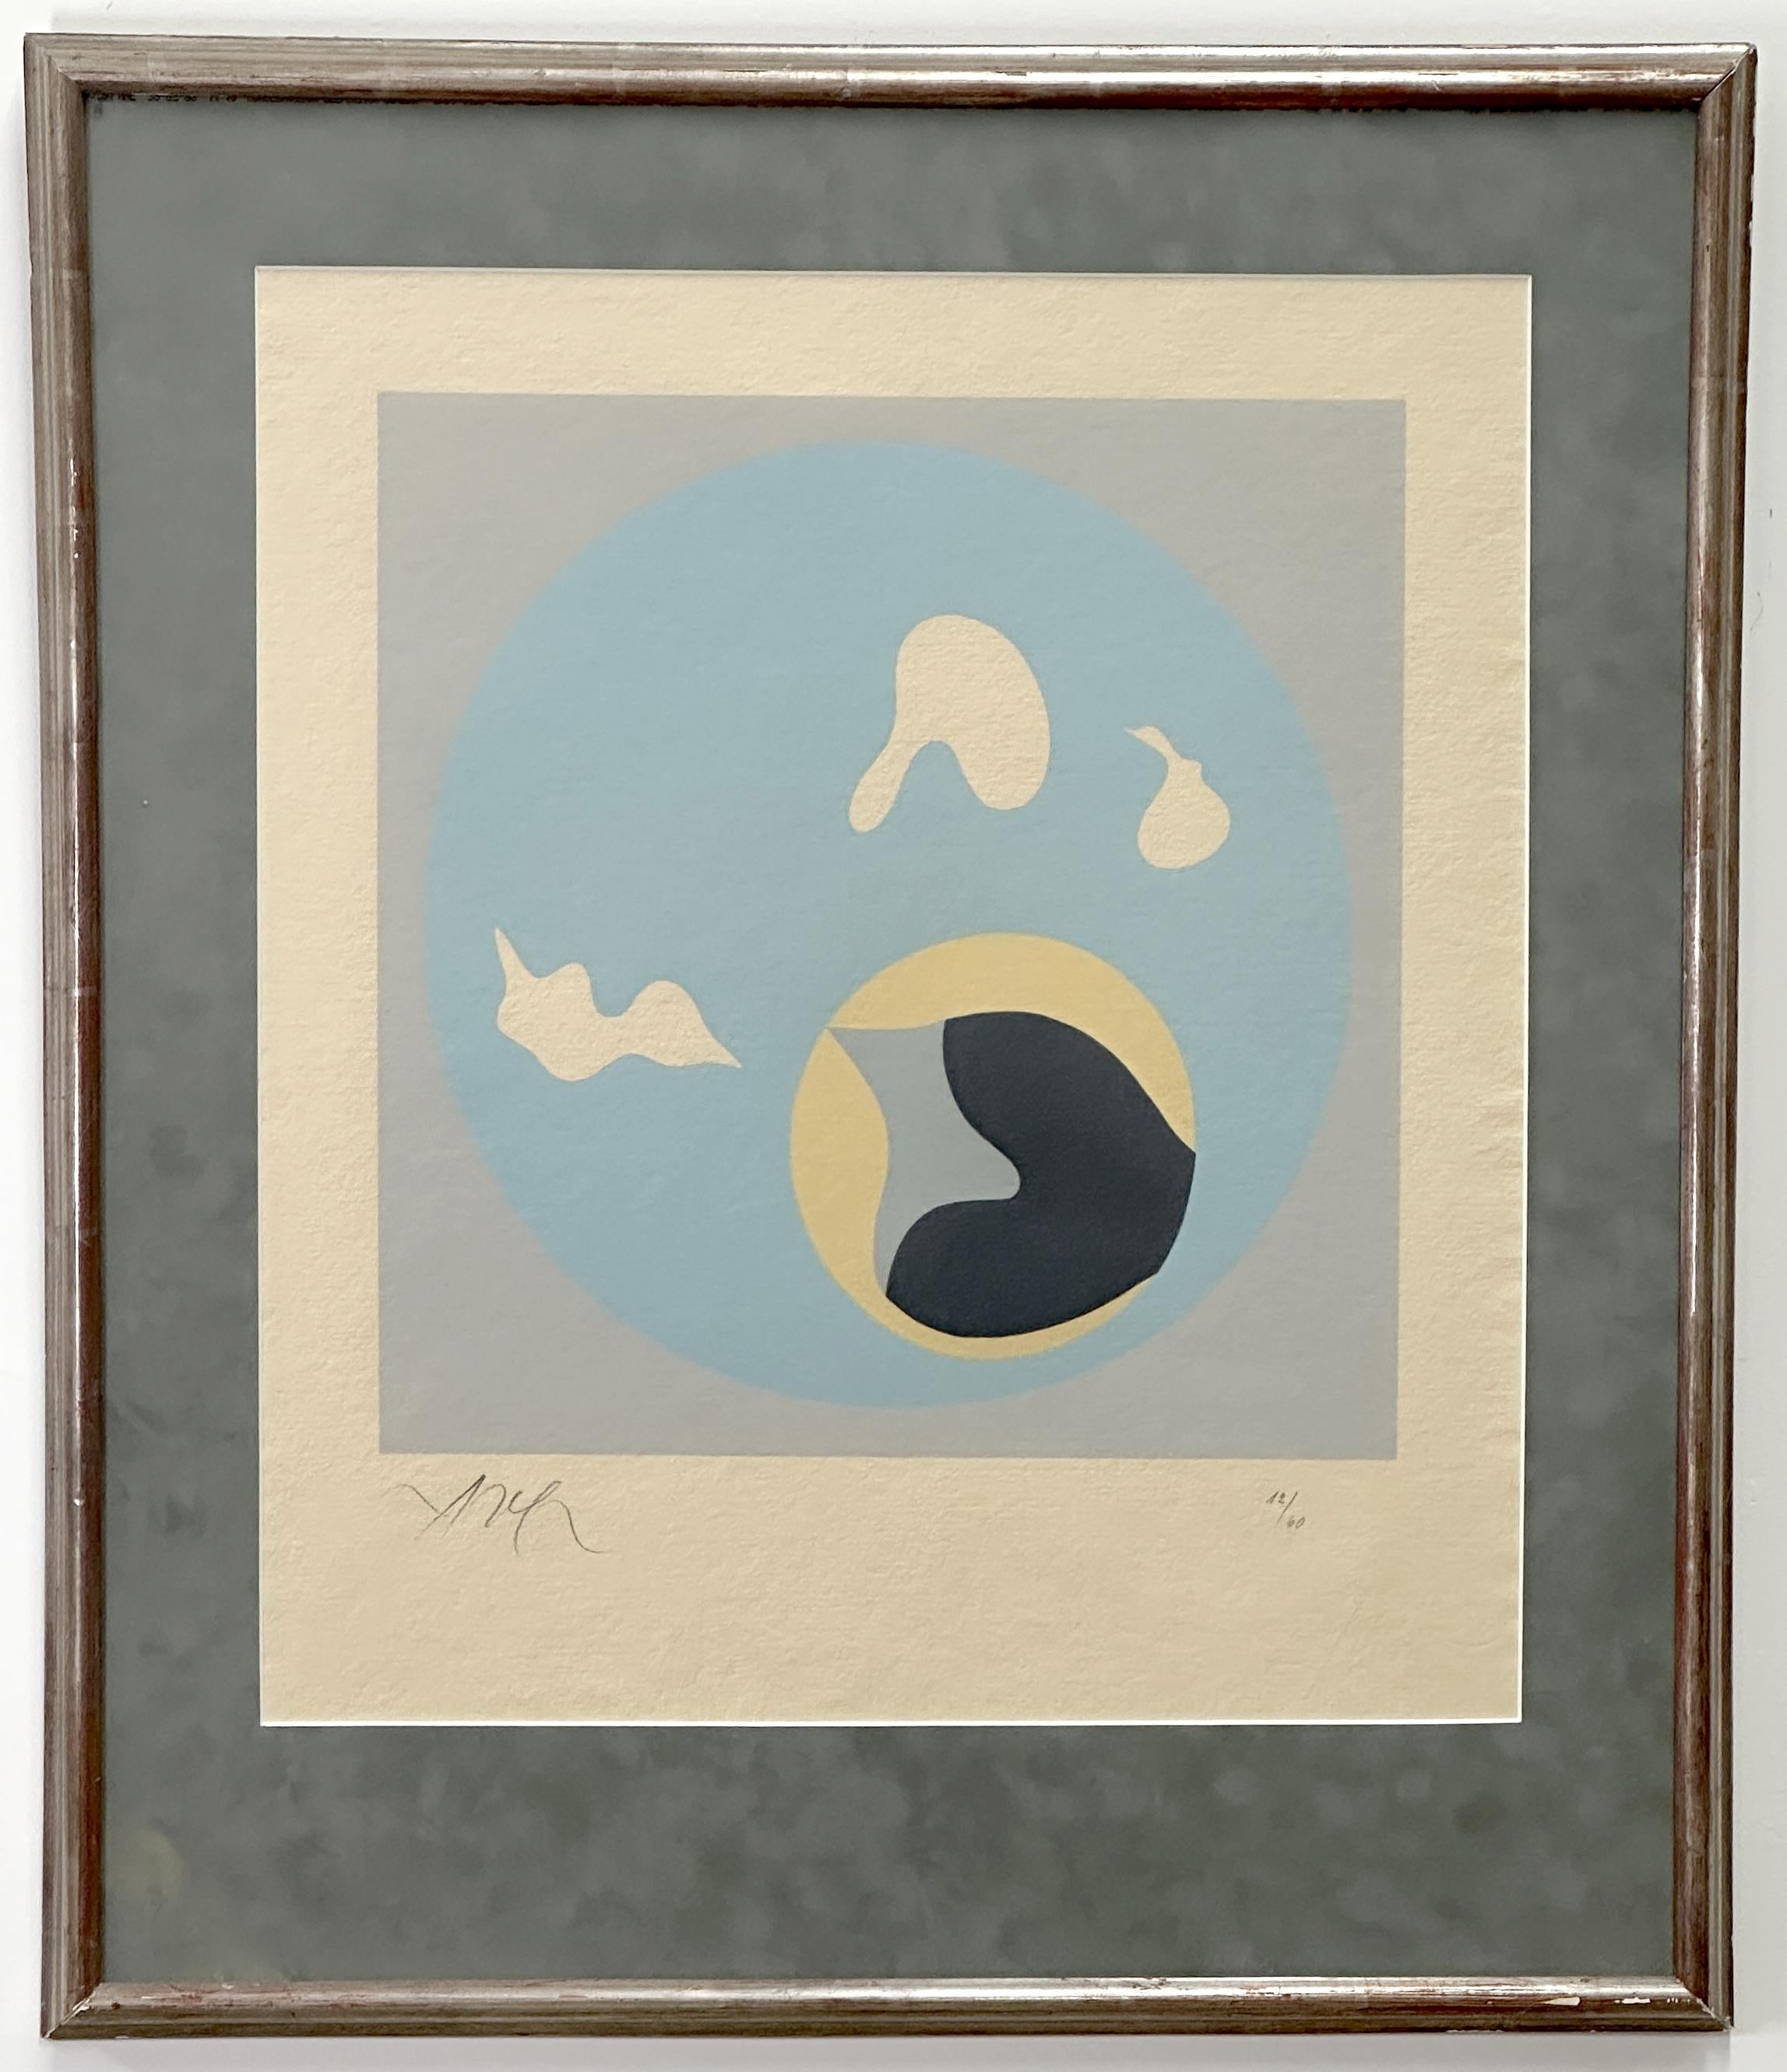 What did Jean Arp believe?